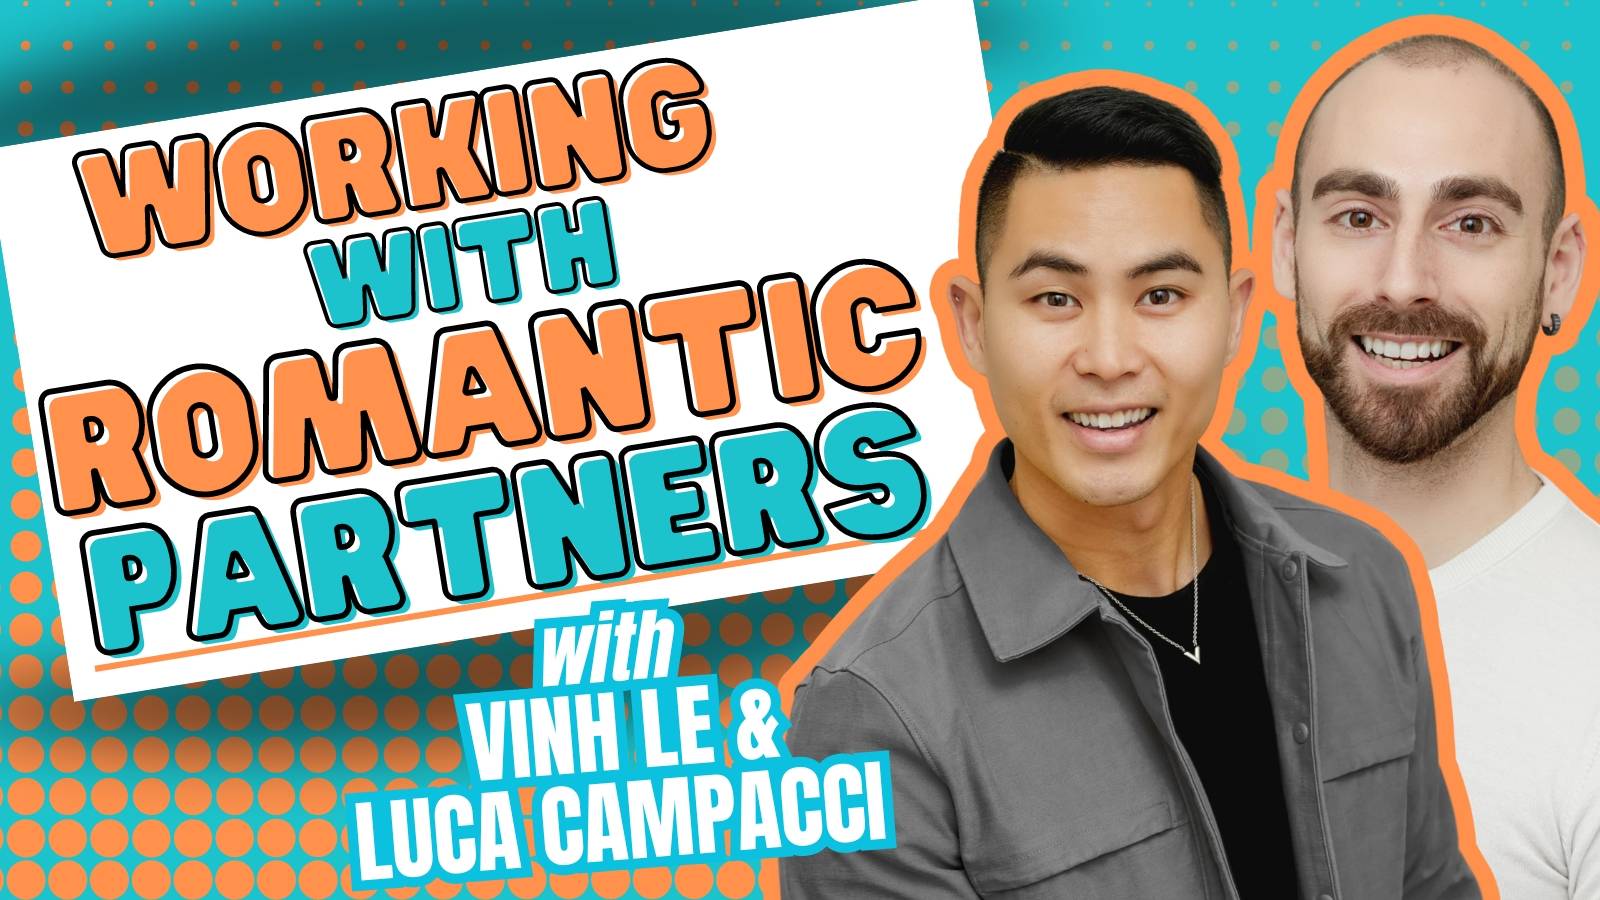 Vinh Le & Luca Campacci Working with Romantic Partners